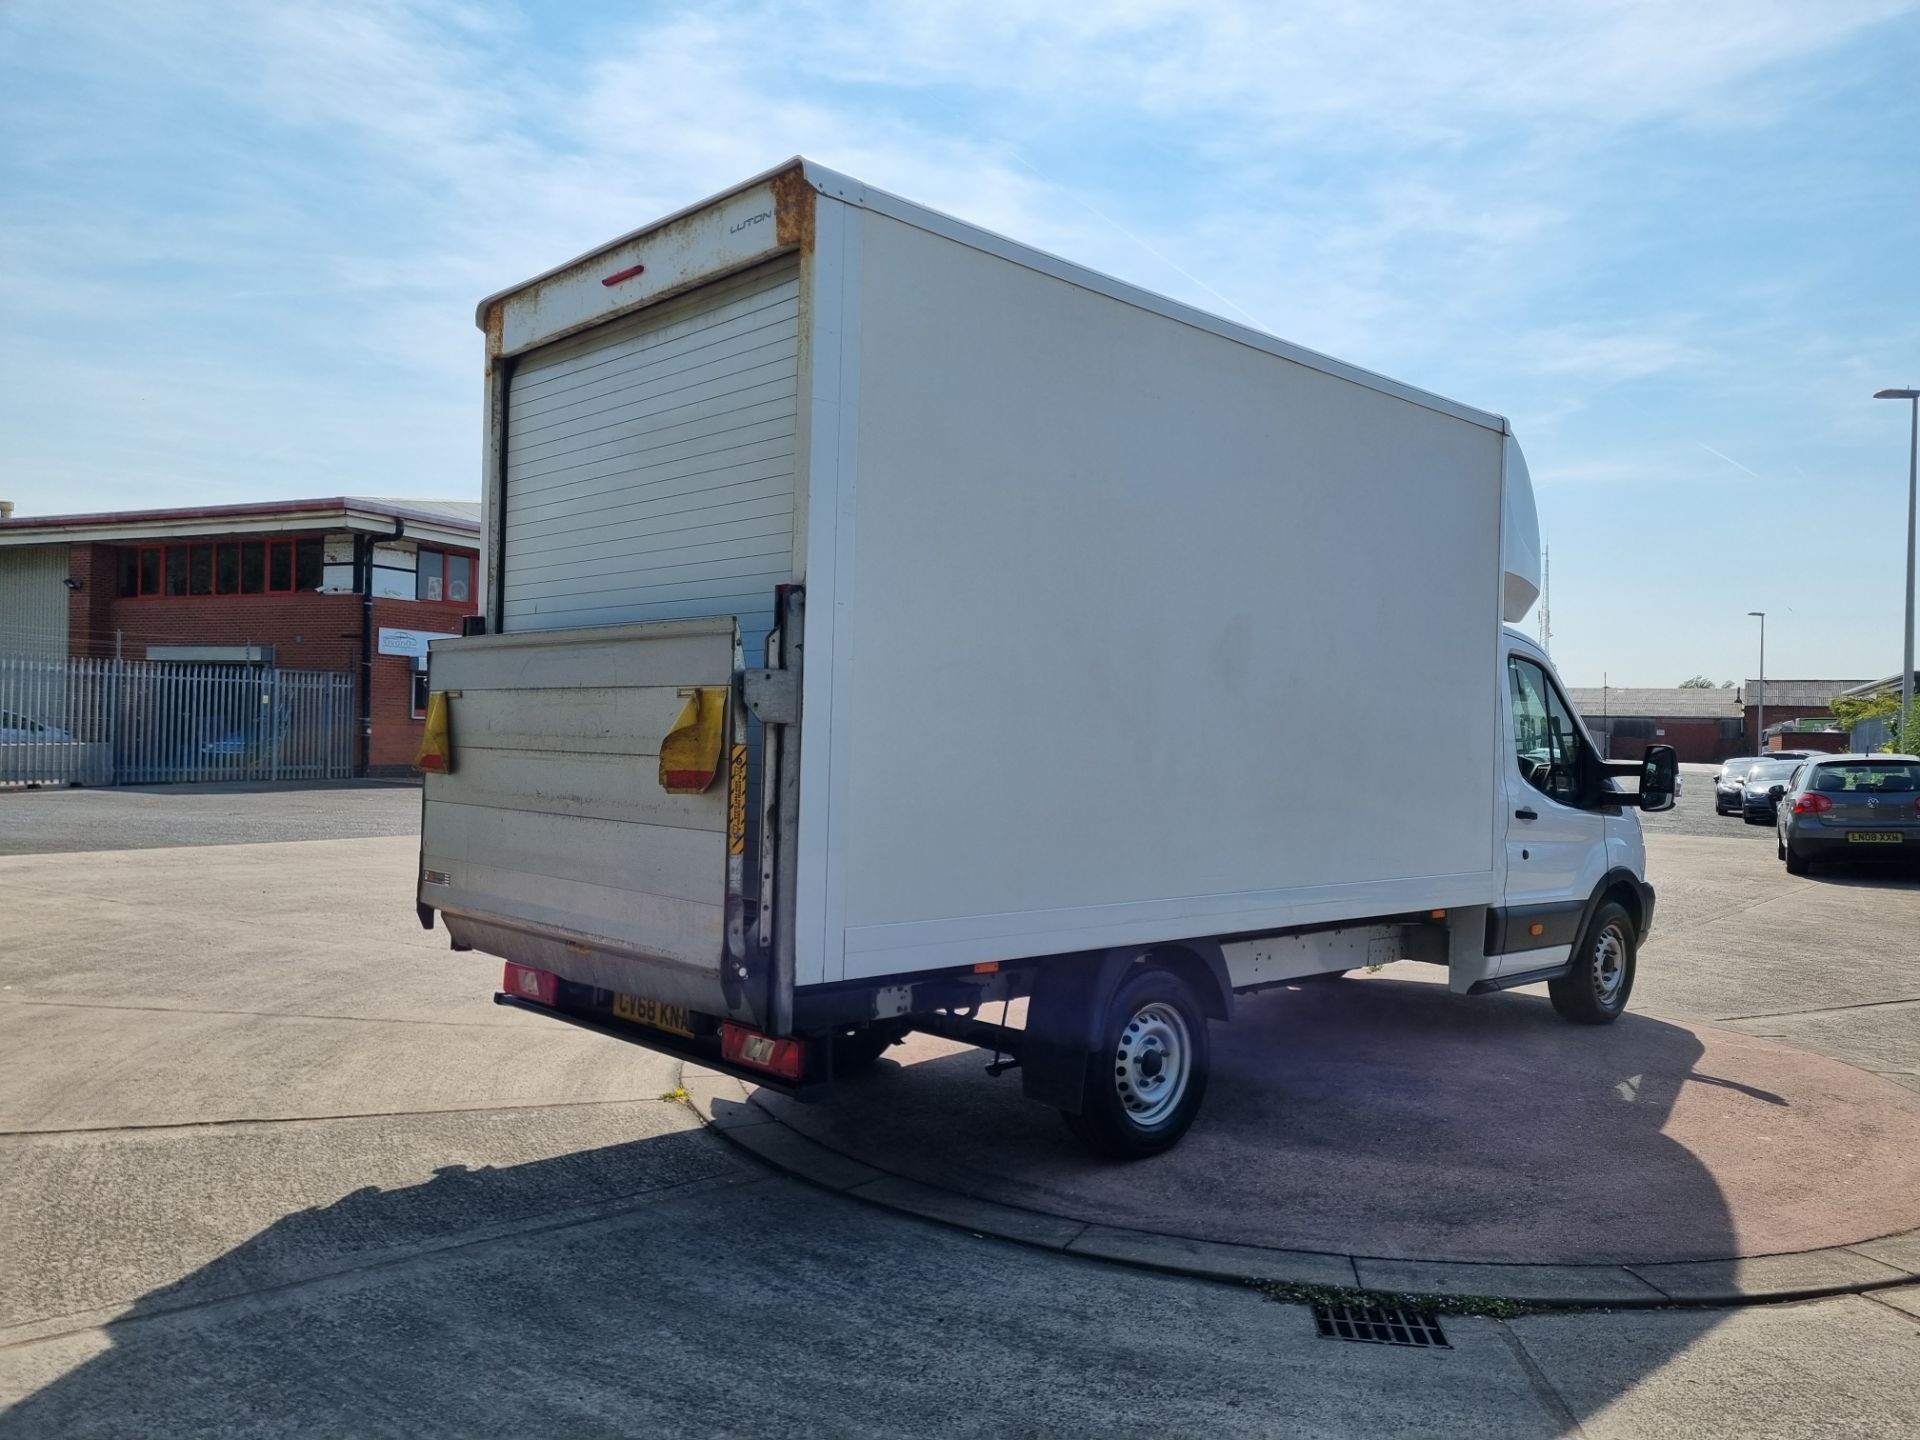 2018 Transit Luton with tail lift - Image 6 of 13